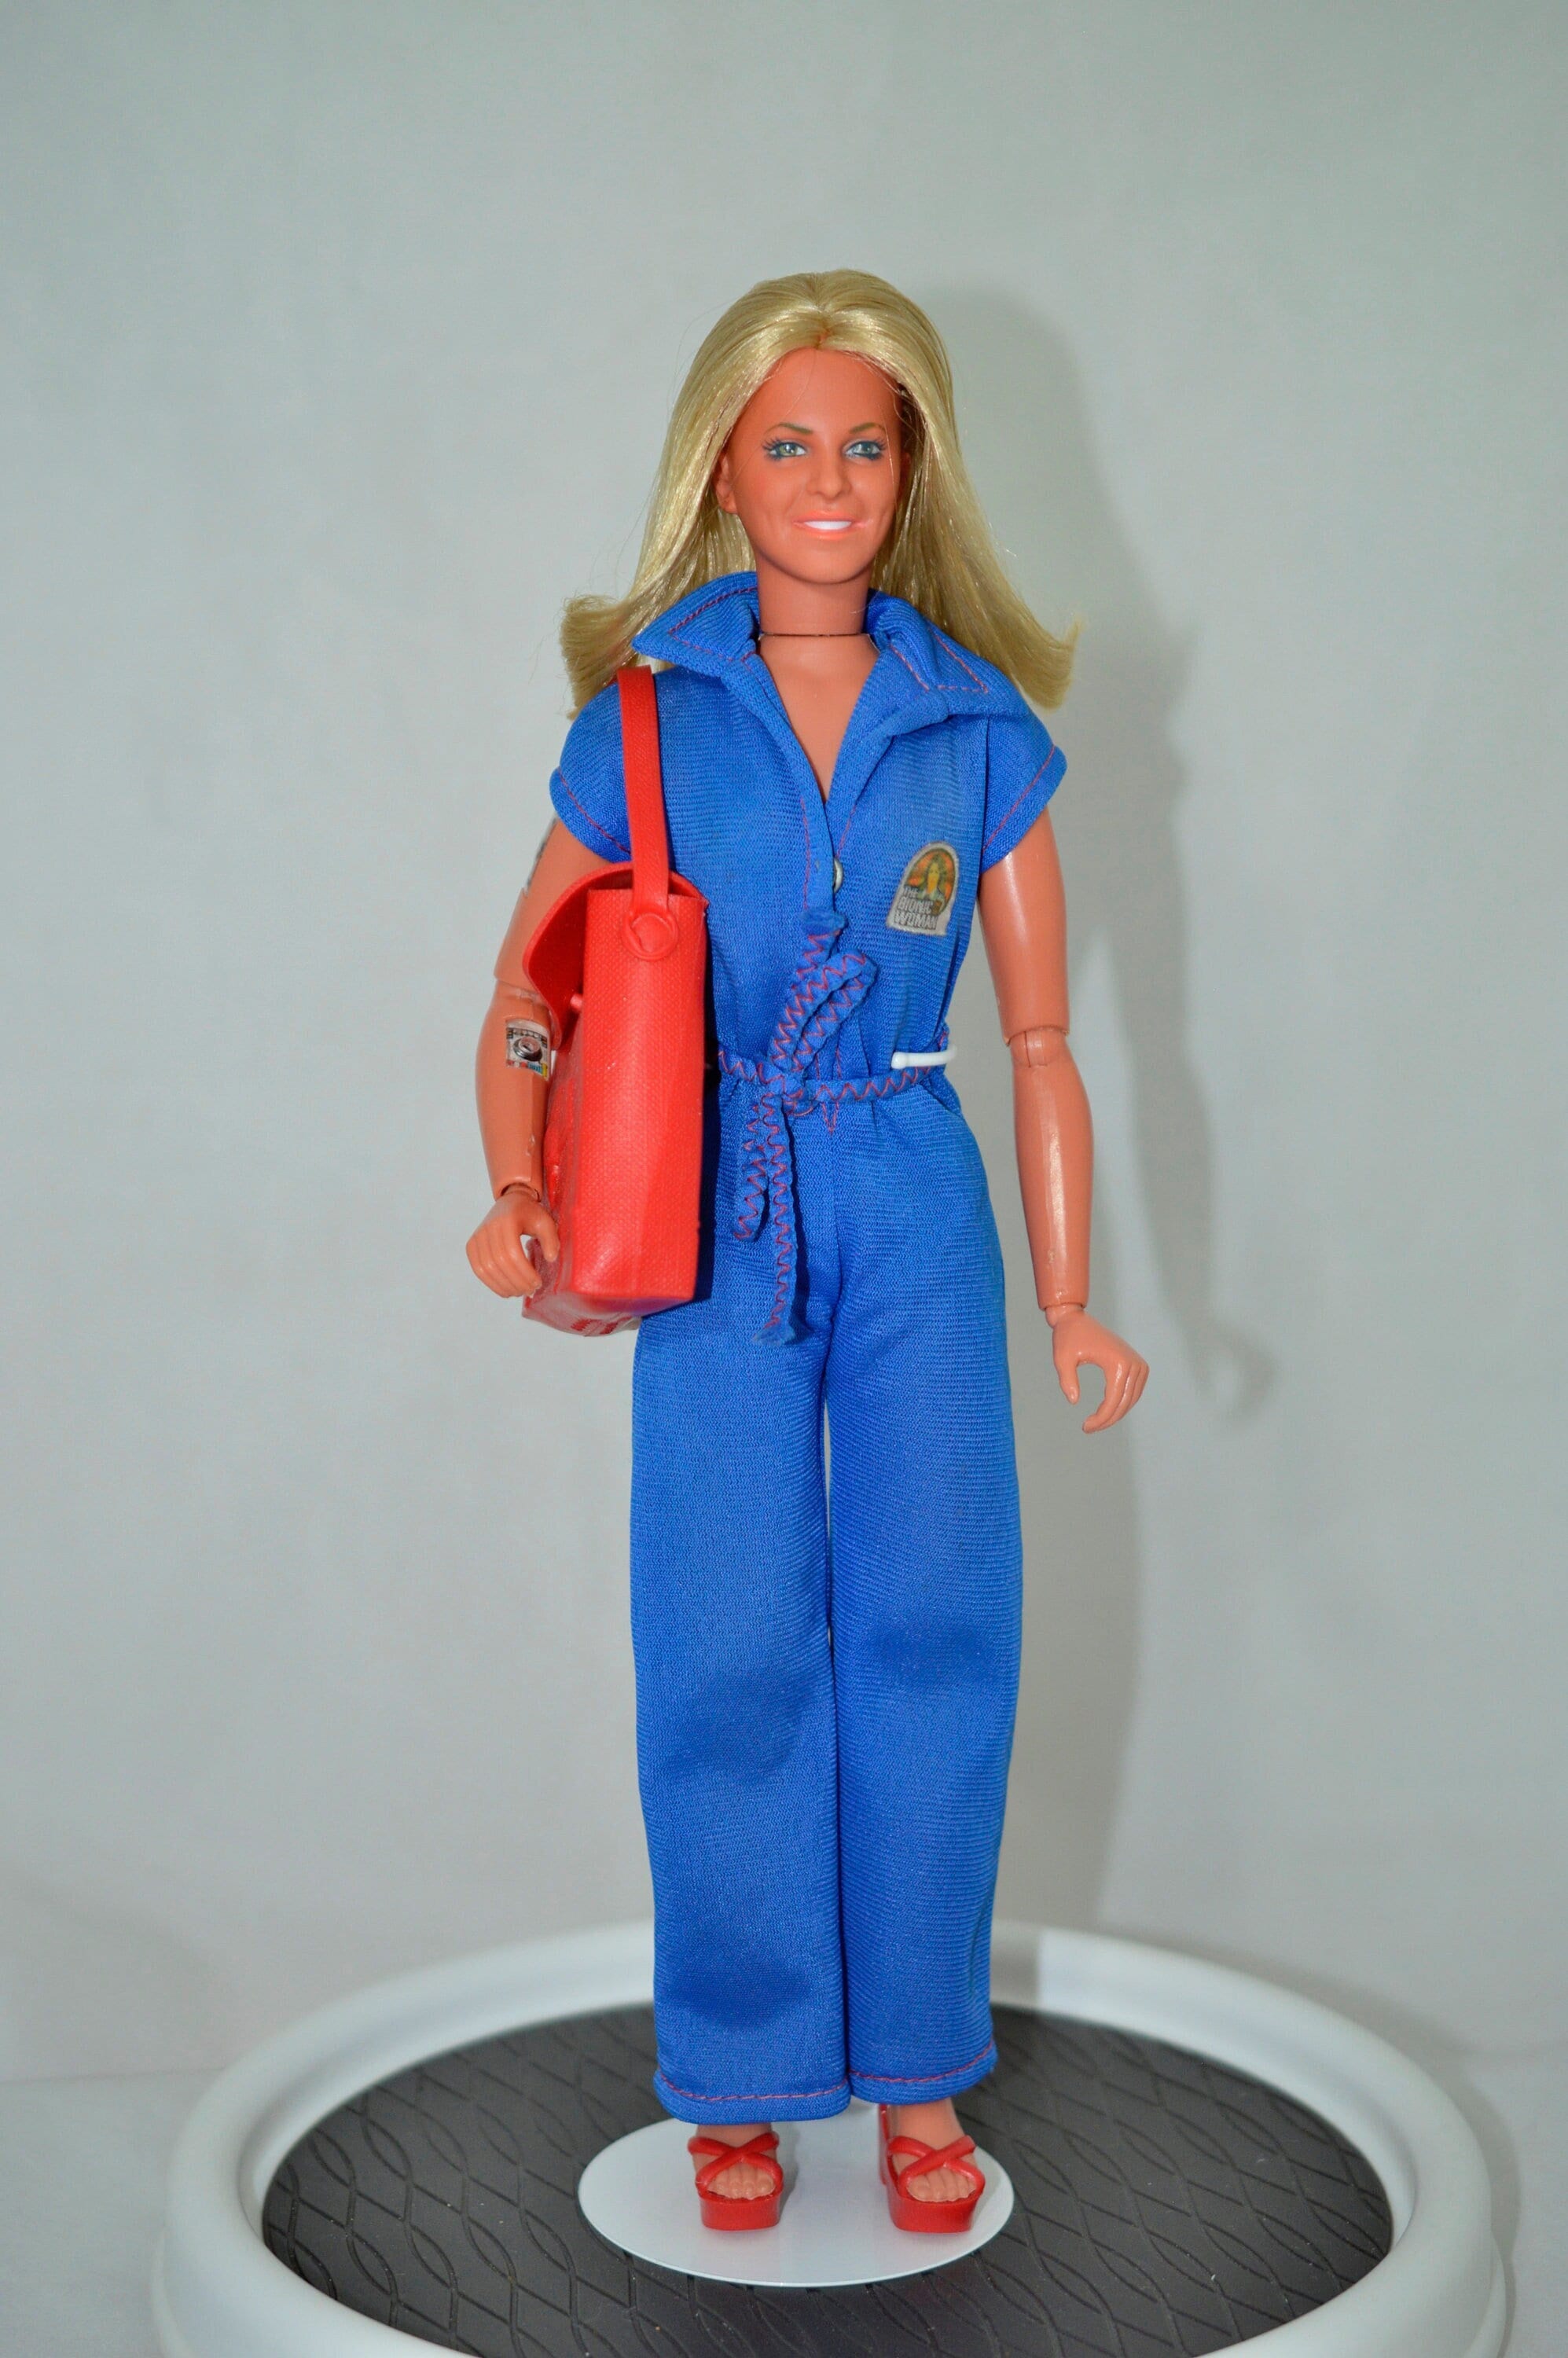 Bionic Woman Jaime Sommers Original Outfit, Purse & Accessories Kenner Doll  1976 General Mills H. K. Action Figure Six Million Dollar Man -  UK